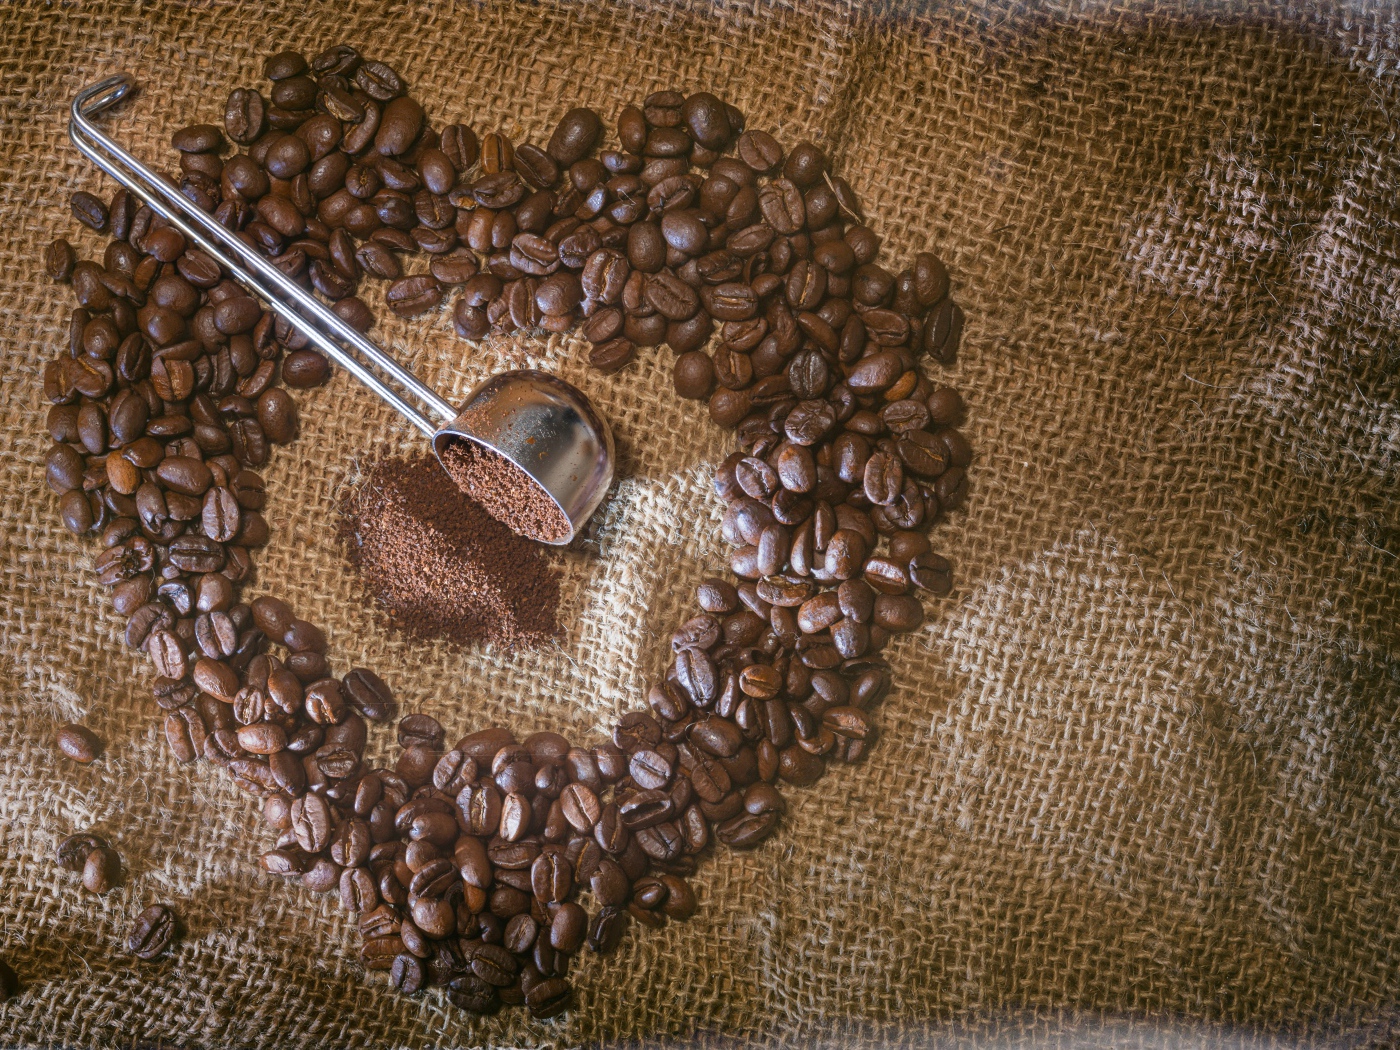 Heart made of coffee beans on a bag